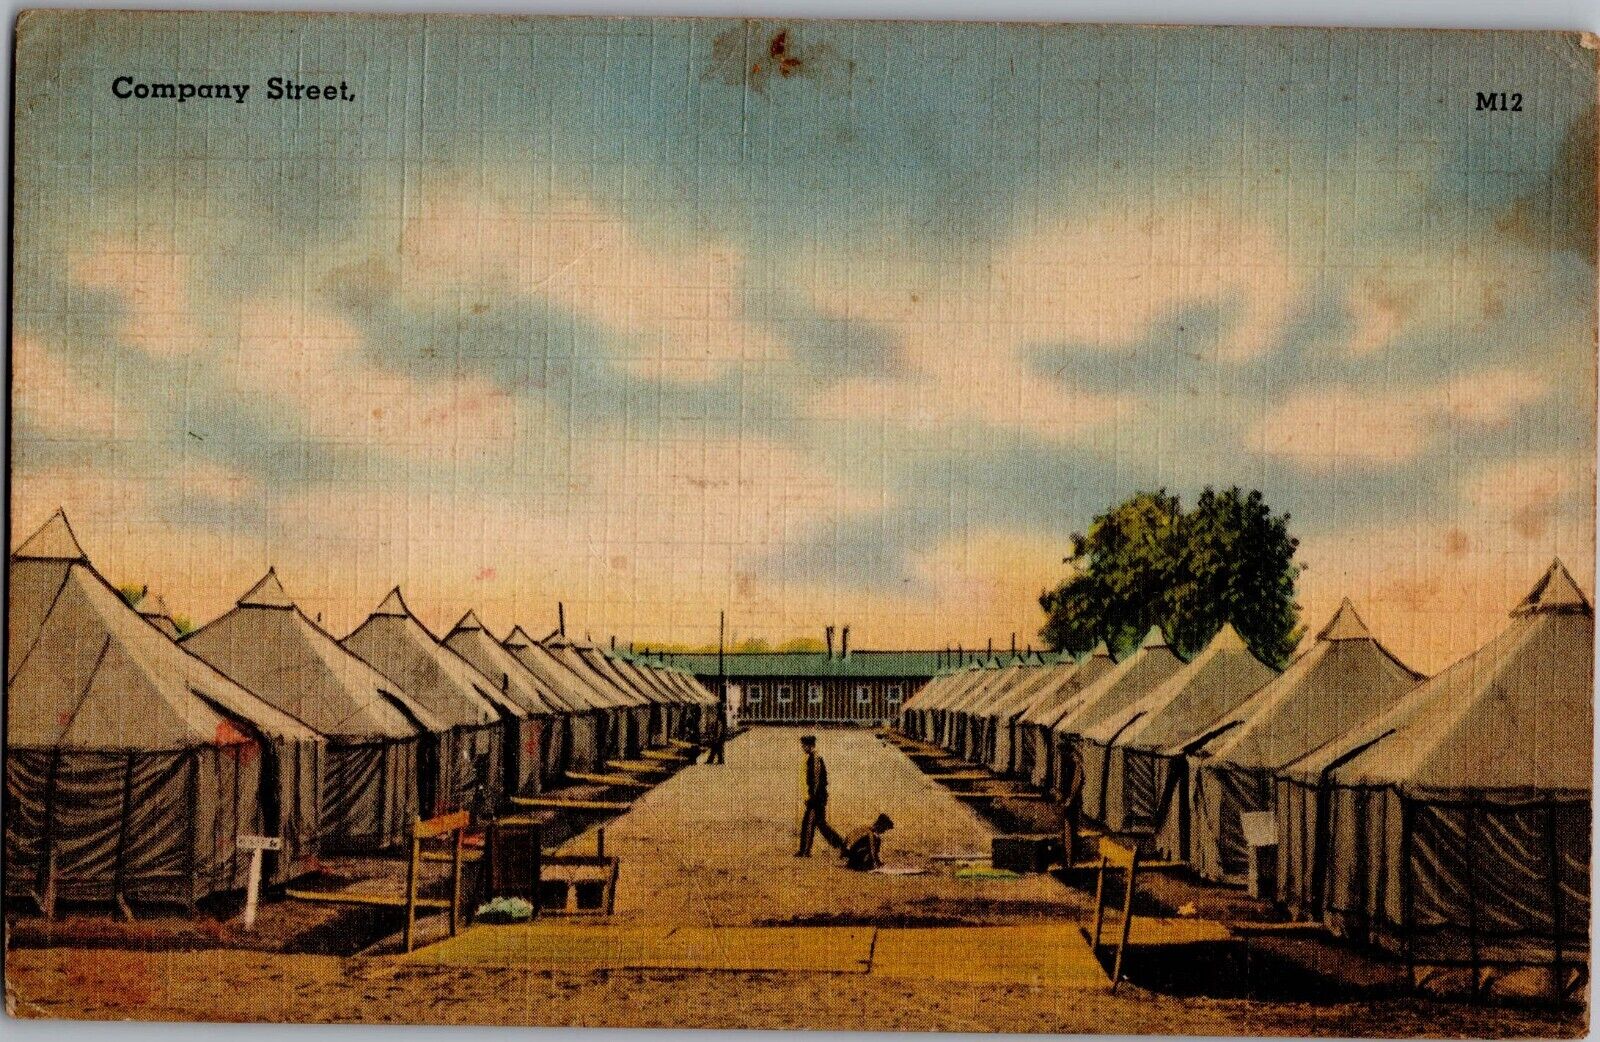 1940s US Army WWII Camp Company Street Vintage Linen Postcard Unposted